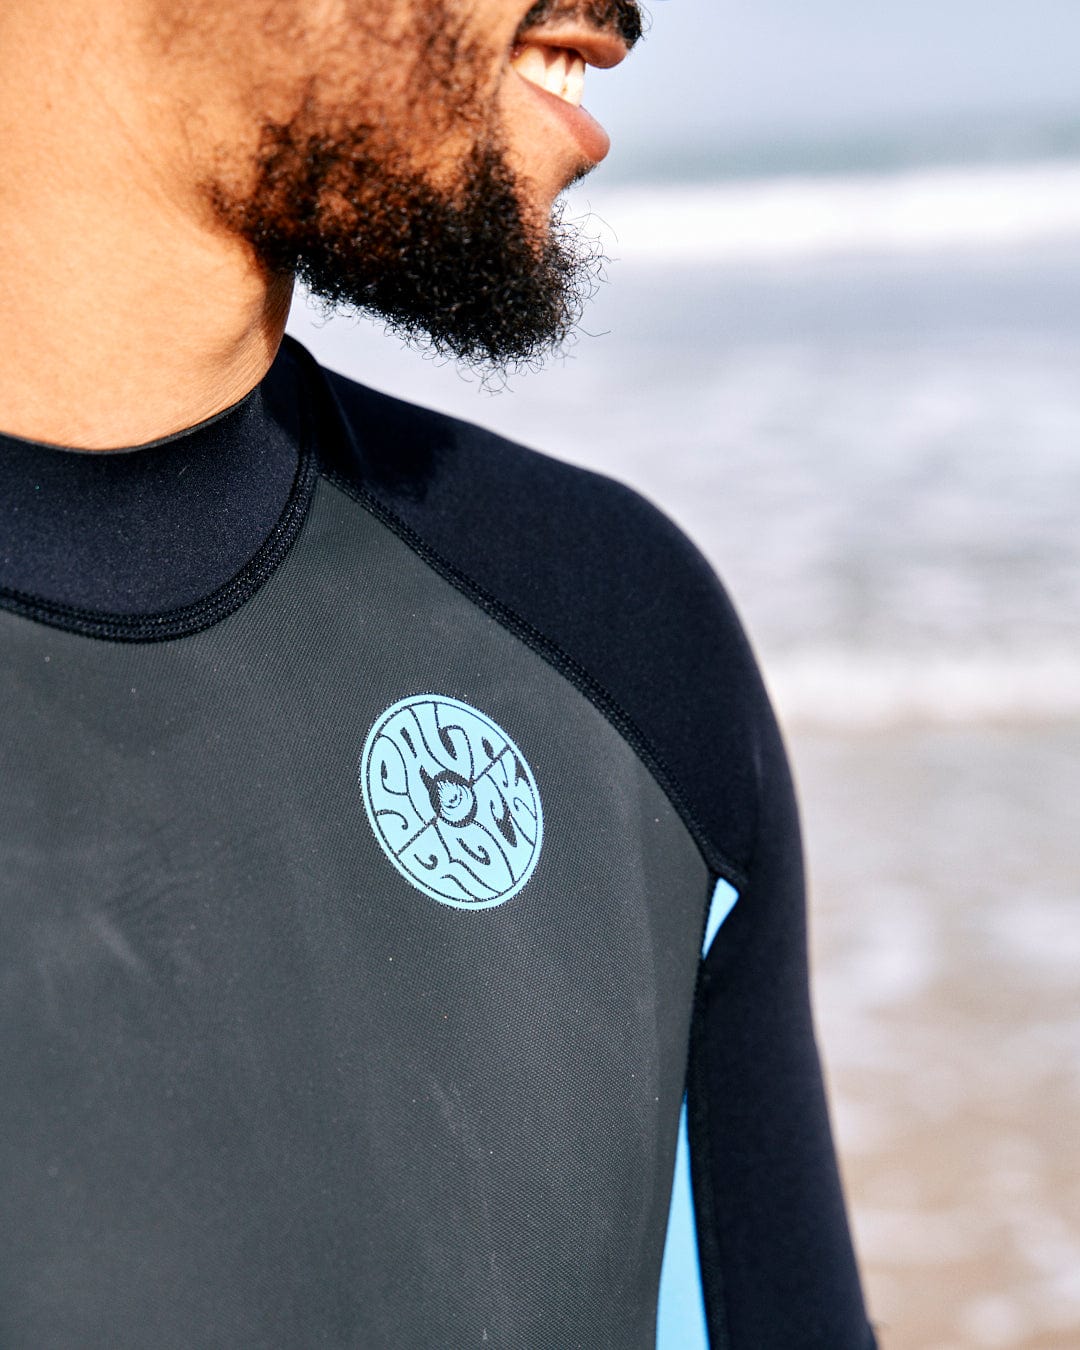 Close-up of a man wearing a Core - Men's 3/2 Shortie Wetsuit in Black/Blue by Saltrock, with a circular logo on the chest, standing by the beach, partially facing the ocean.